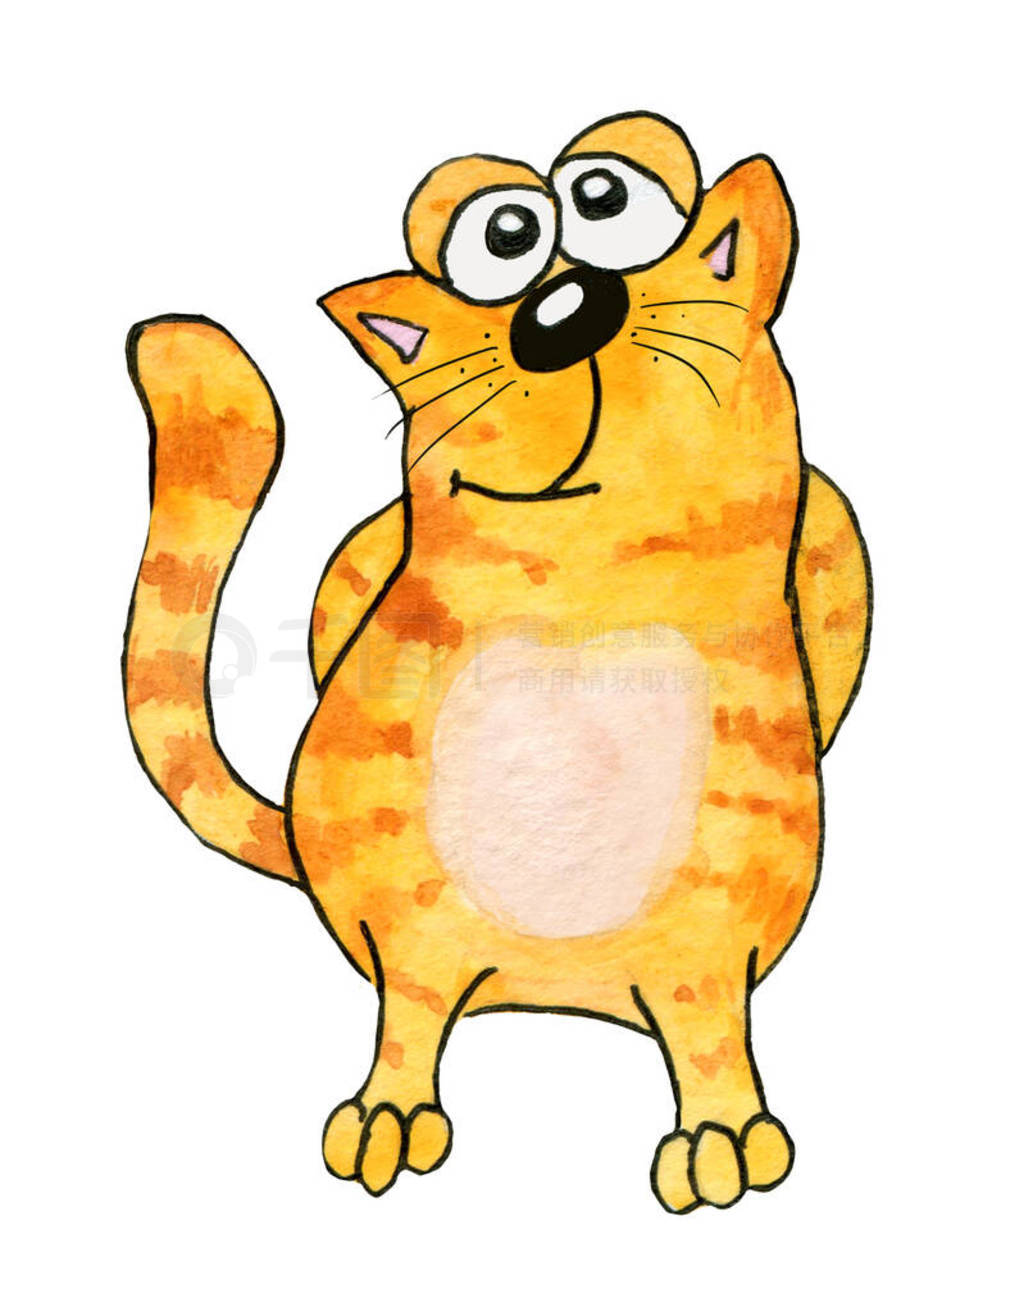 Orange, striped funny cats in cartoon style.